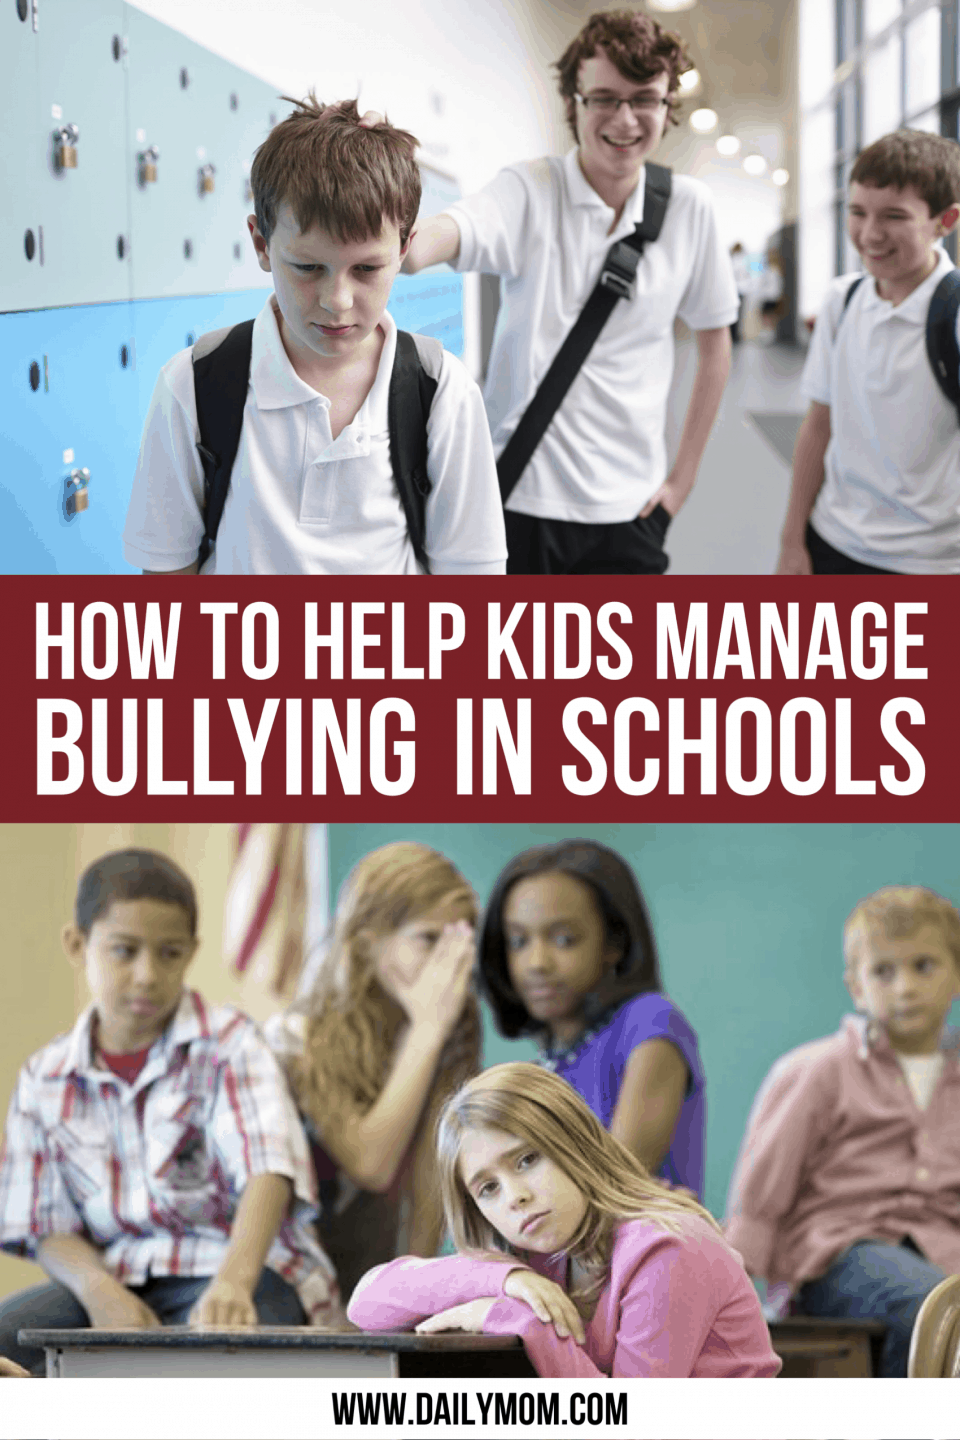 Daily Mom Parent Portal Bullying In Schools